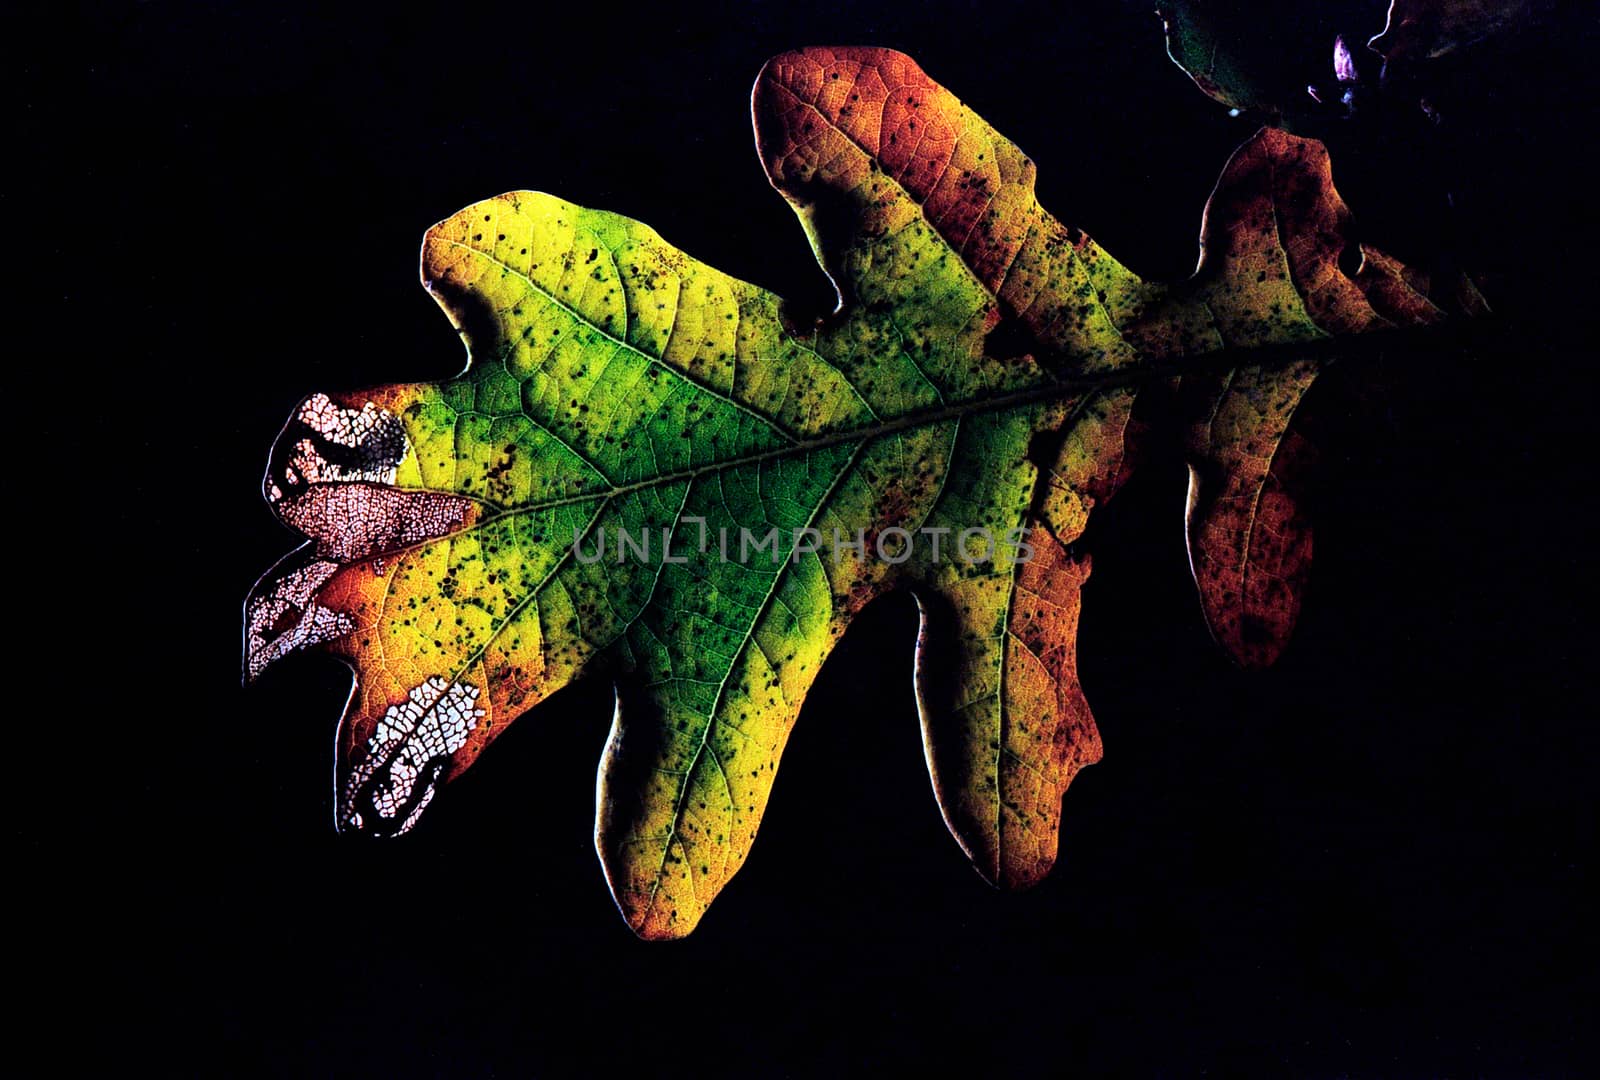 Multicolored autumnal oak leaf with light shinning through against a black background with a some places the chlorophyll gone